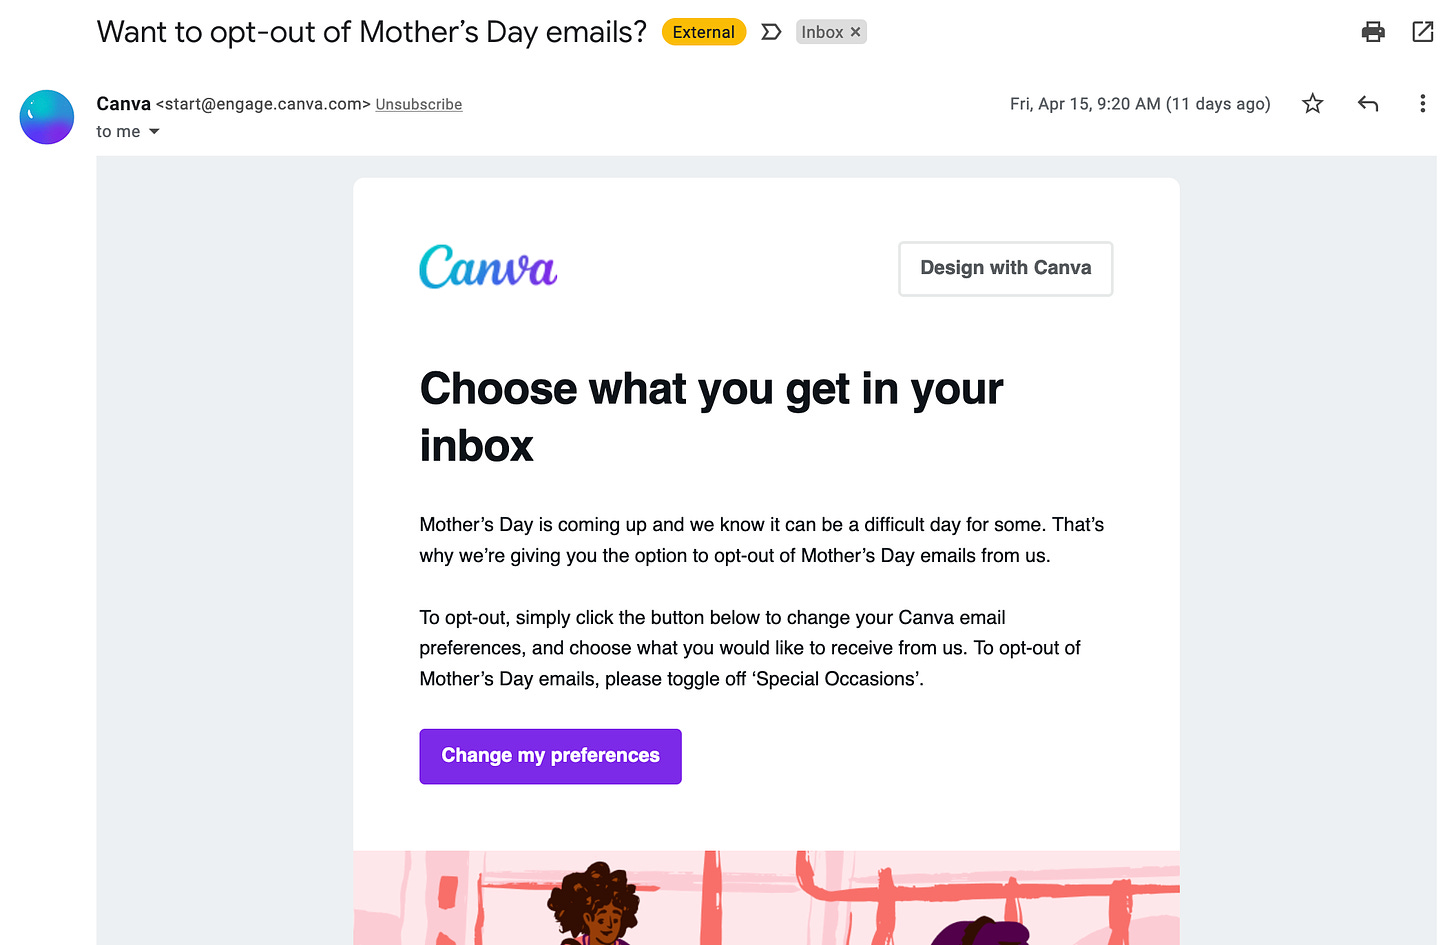 Want to opt out of Mother's Day emails? Choose what you get in your inbox. Mother's Day is coming up and we know it can be a difficult day for some. That's why we're giving you the option to opt-out of Mother's Day emails from us.